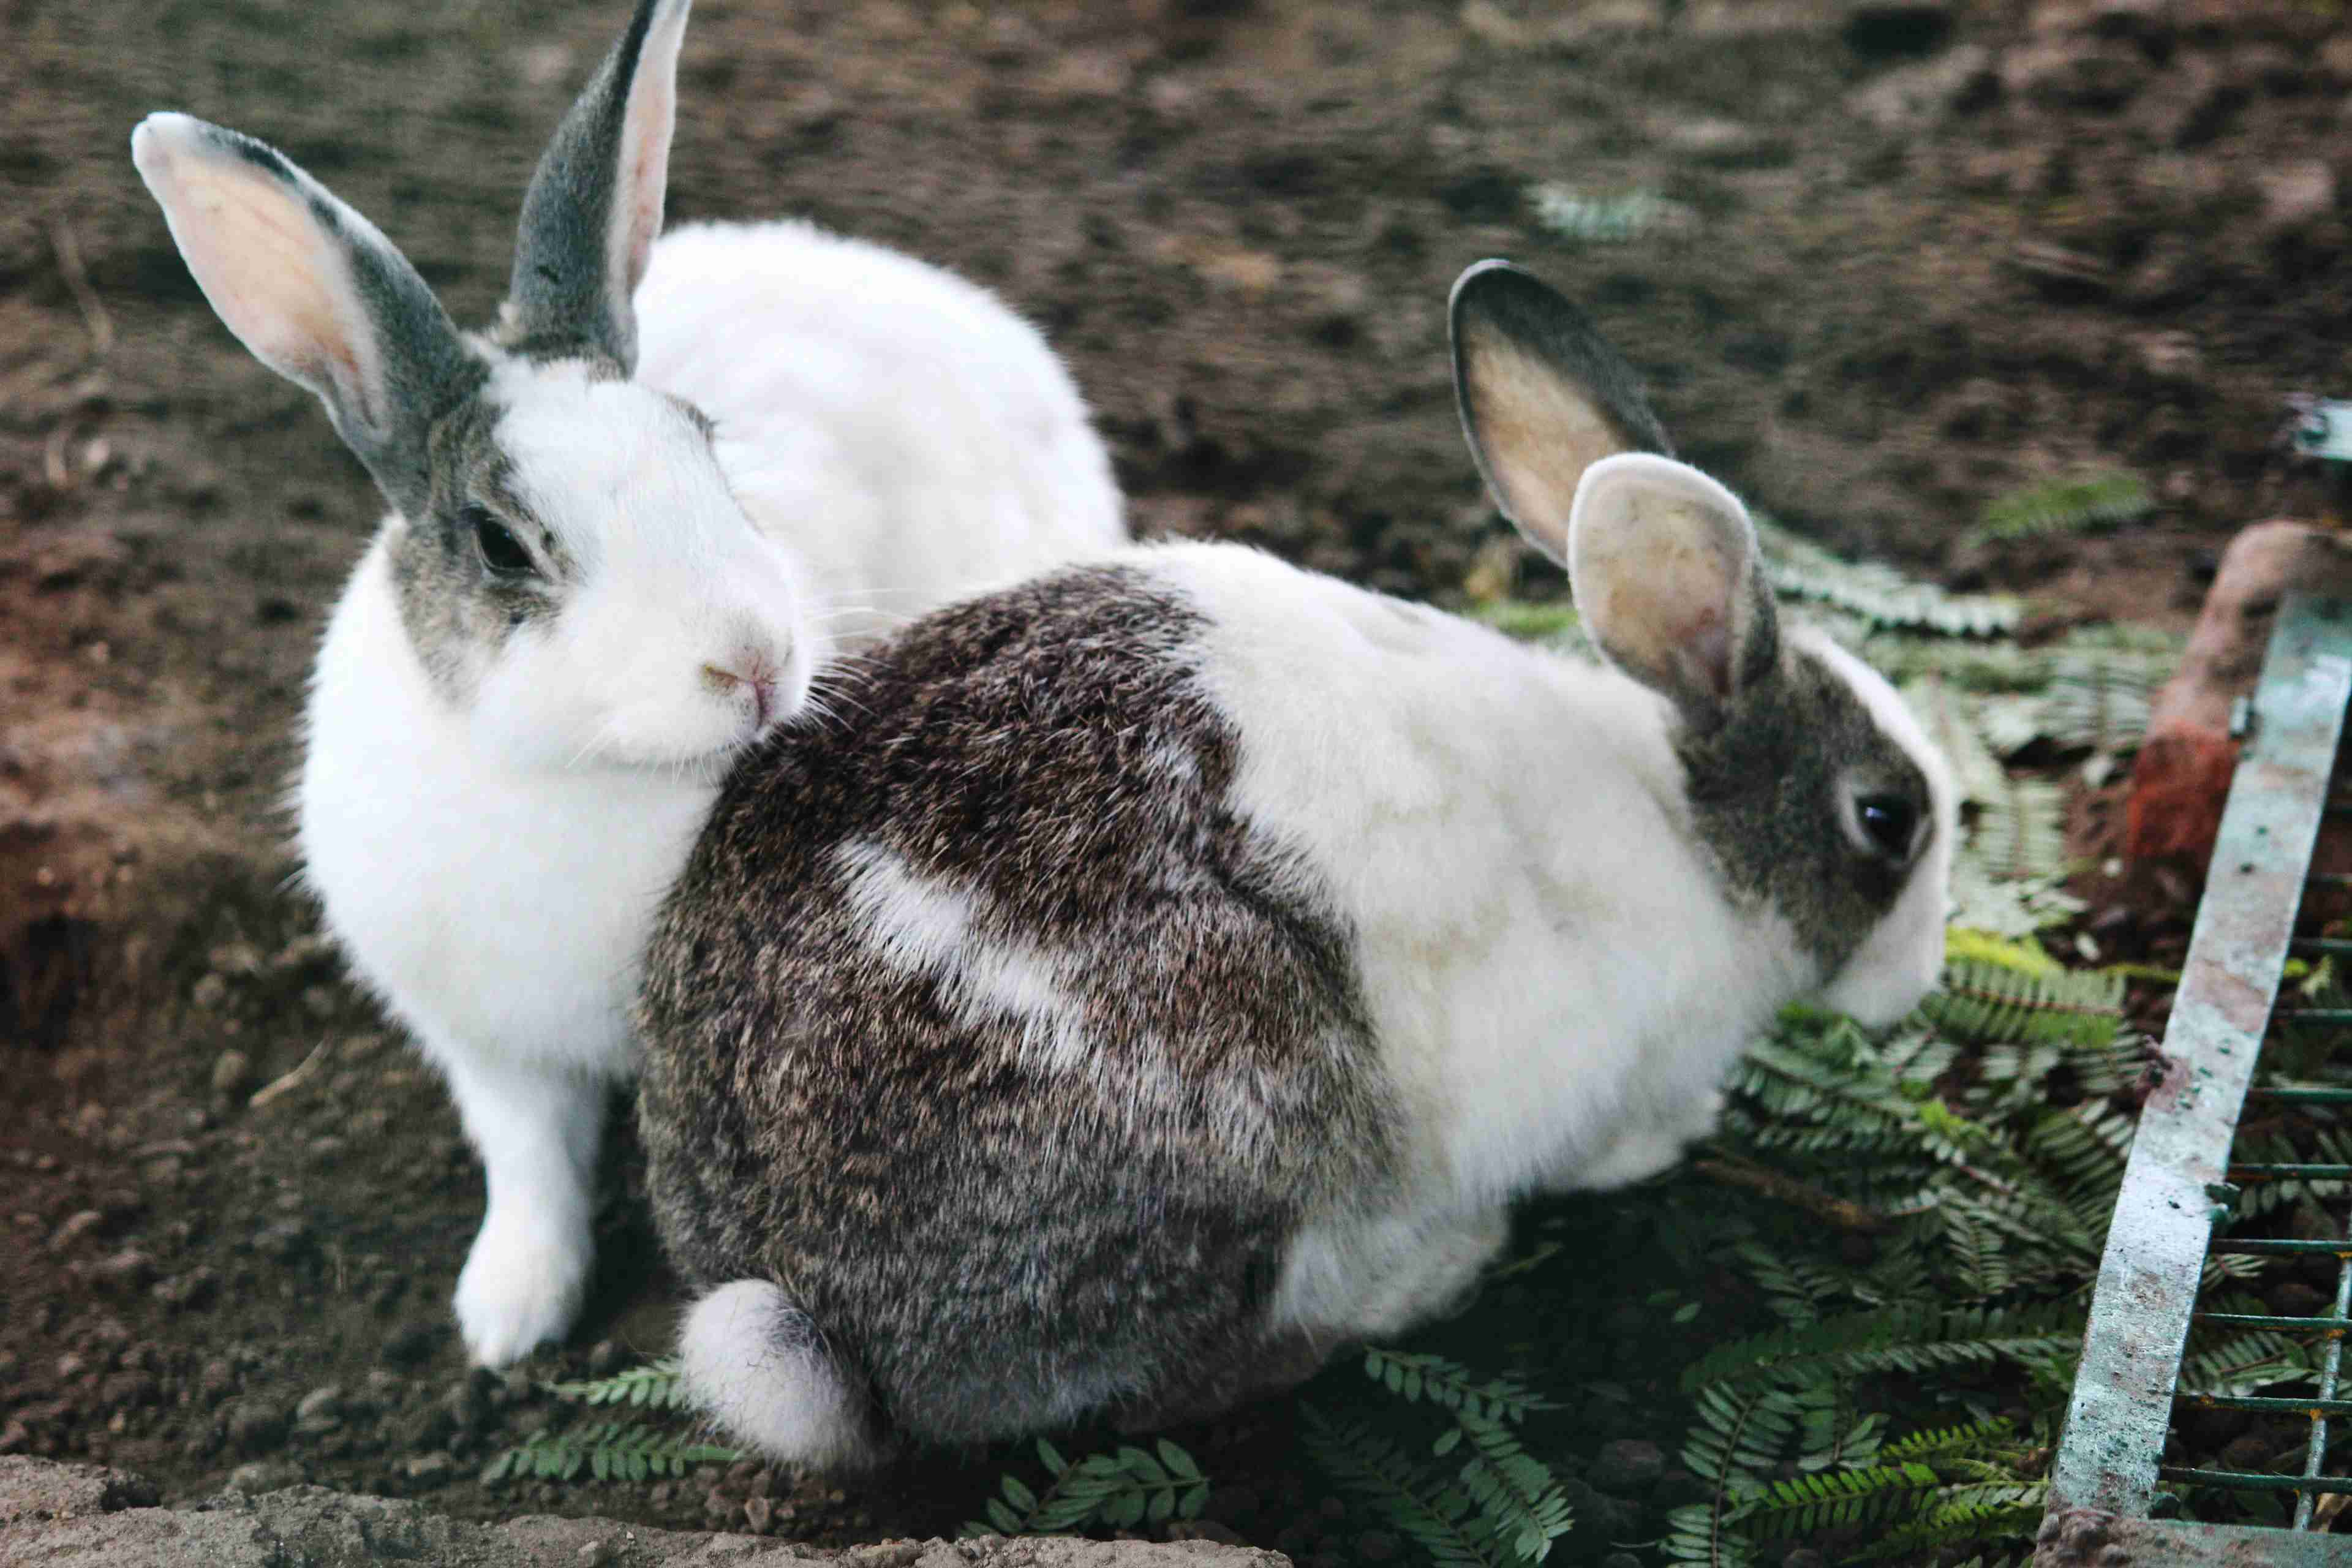 Is Your Pet Rabbit Showing Signs of Heart Disease? Learn the Symptoms to Look Out For